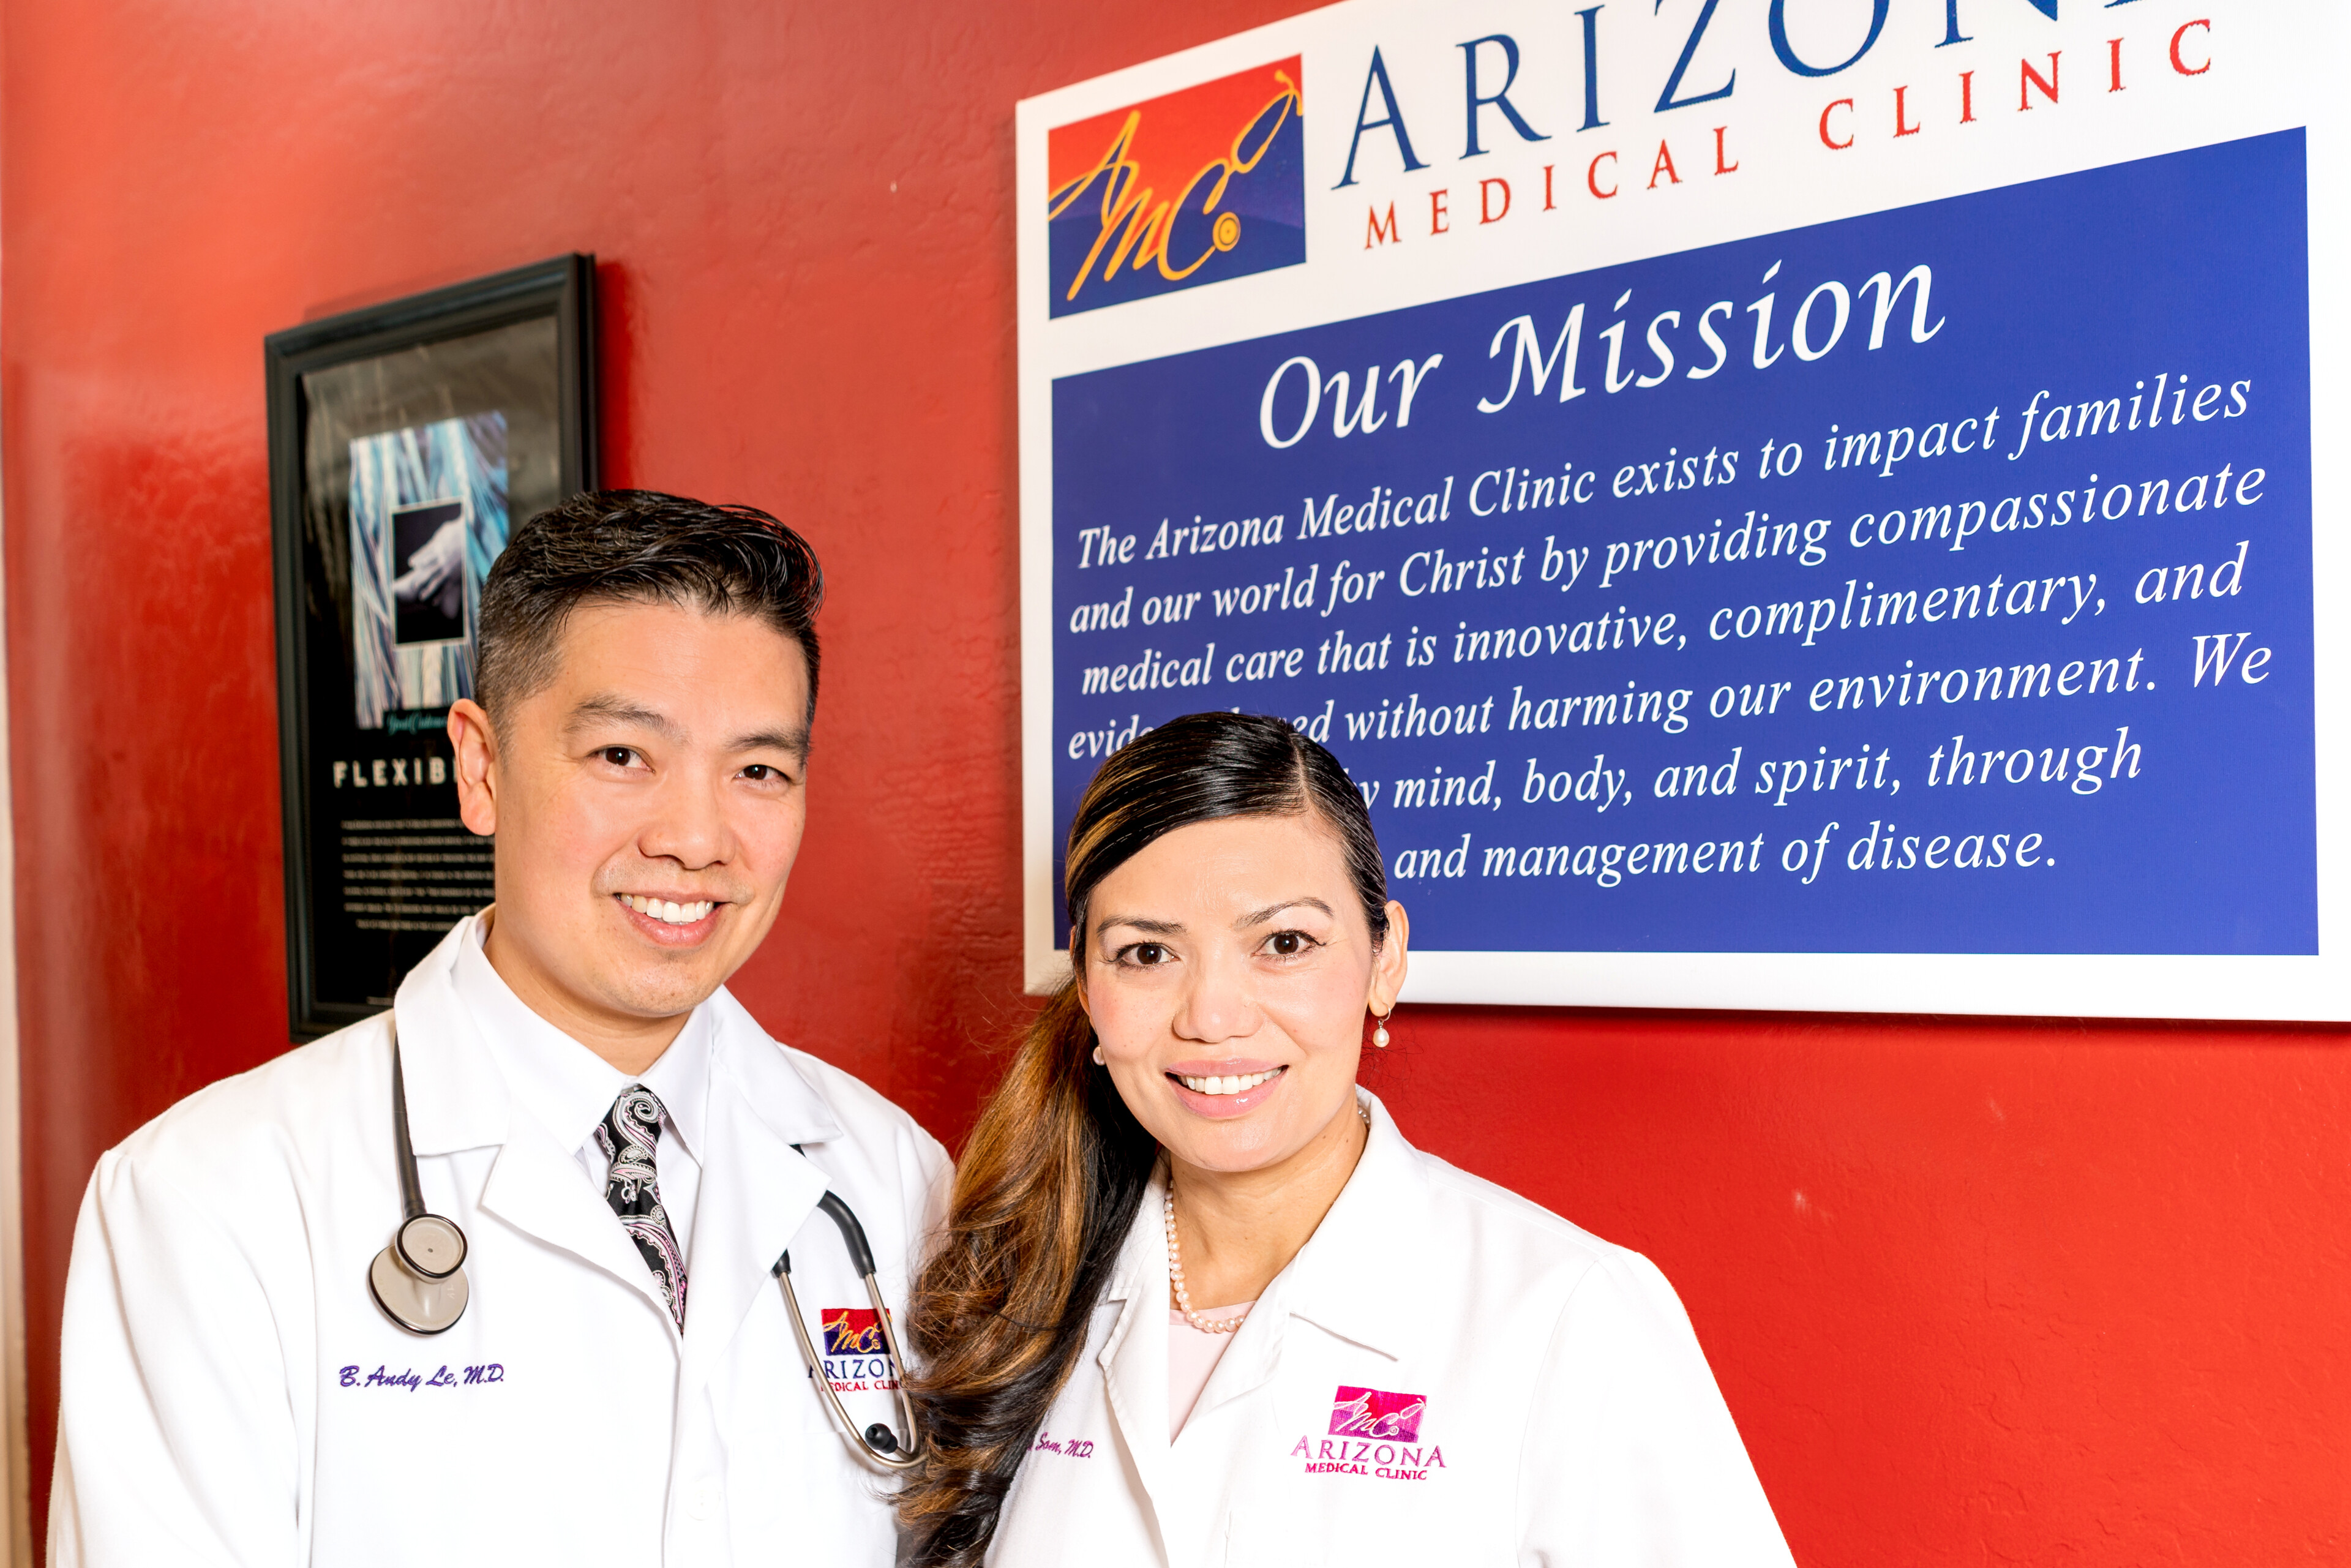 Andy Le and Linda Som next to the Arizona Medical Clinic mission